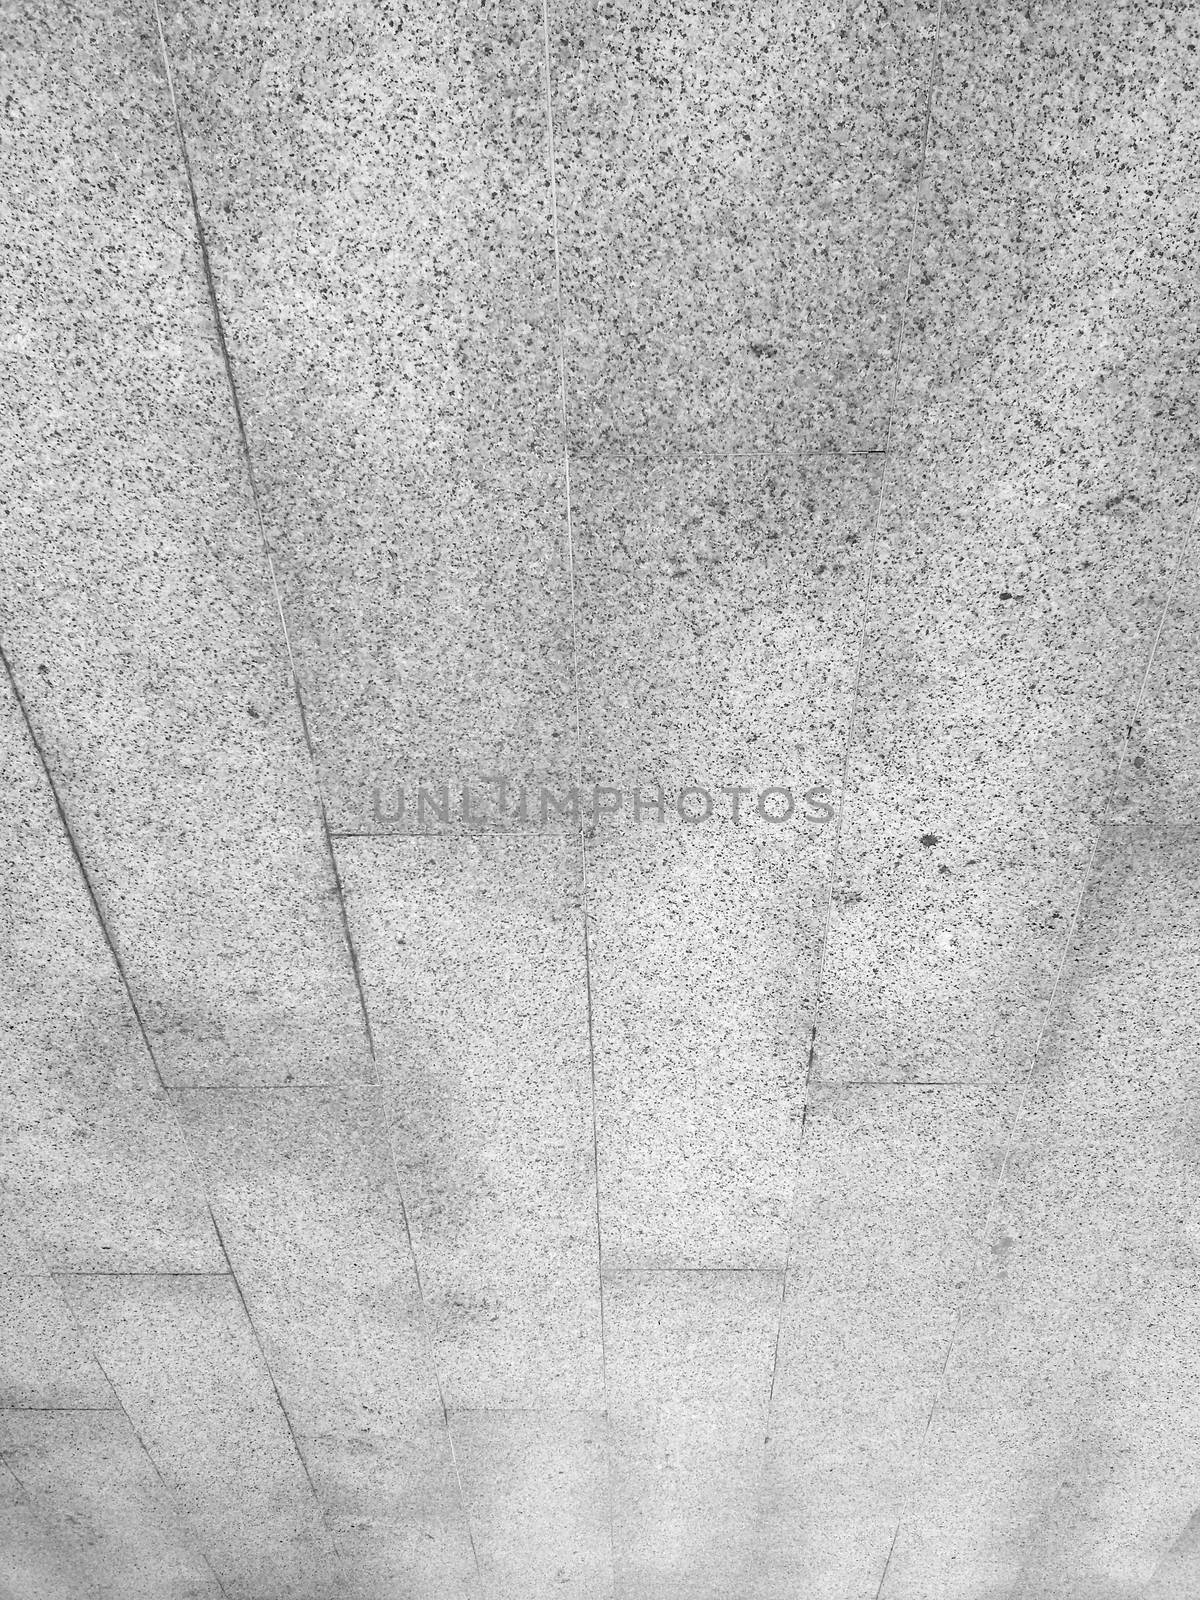 Grey color stone concrete material floor. by gnepphoto